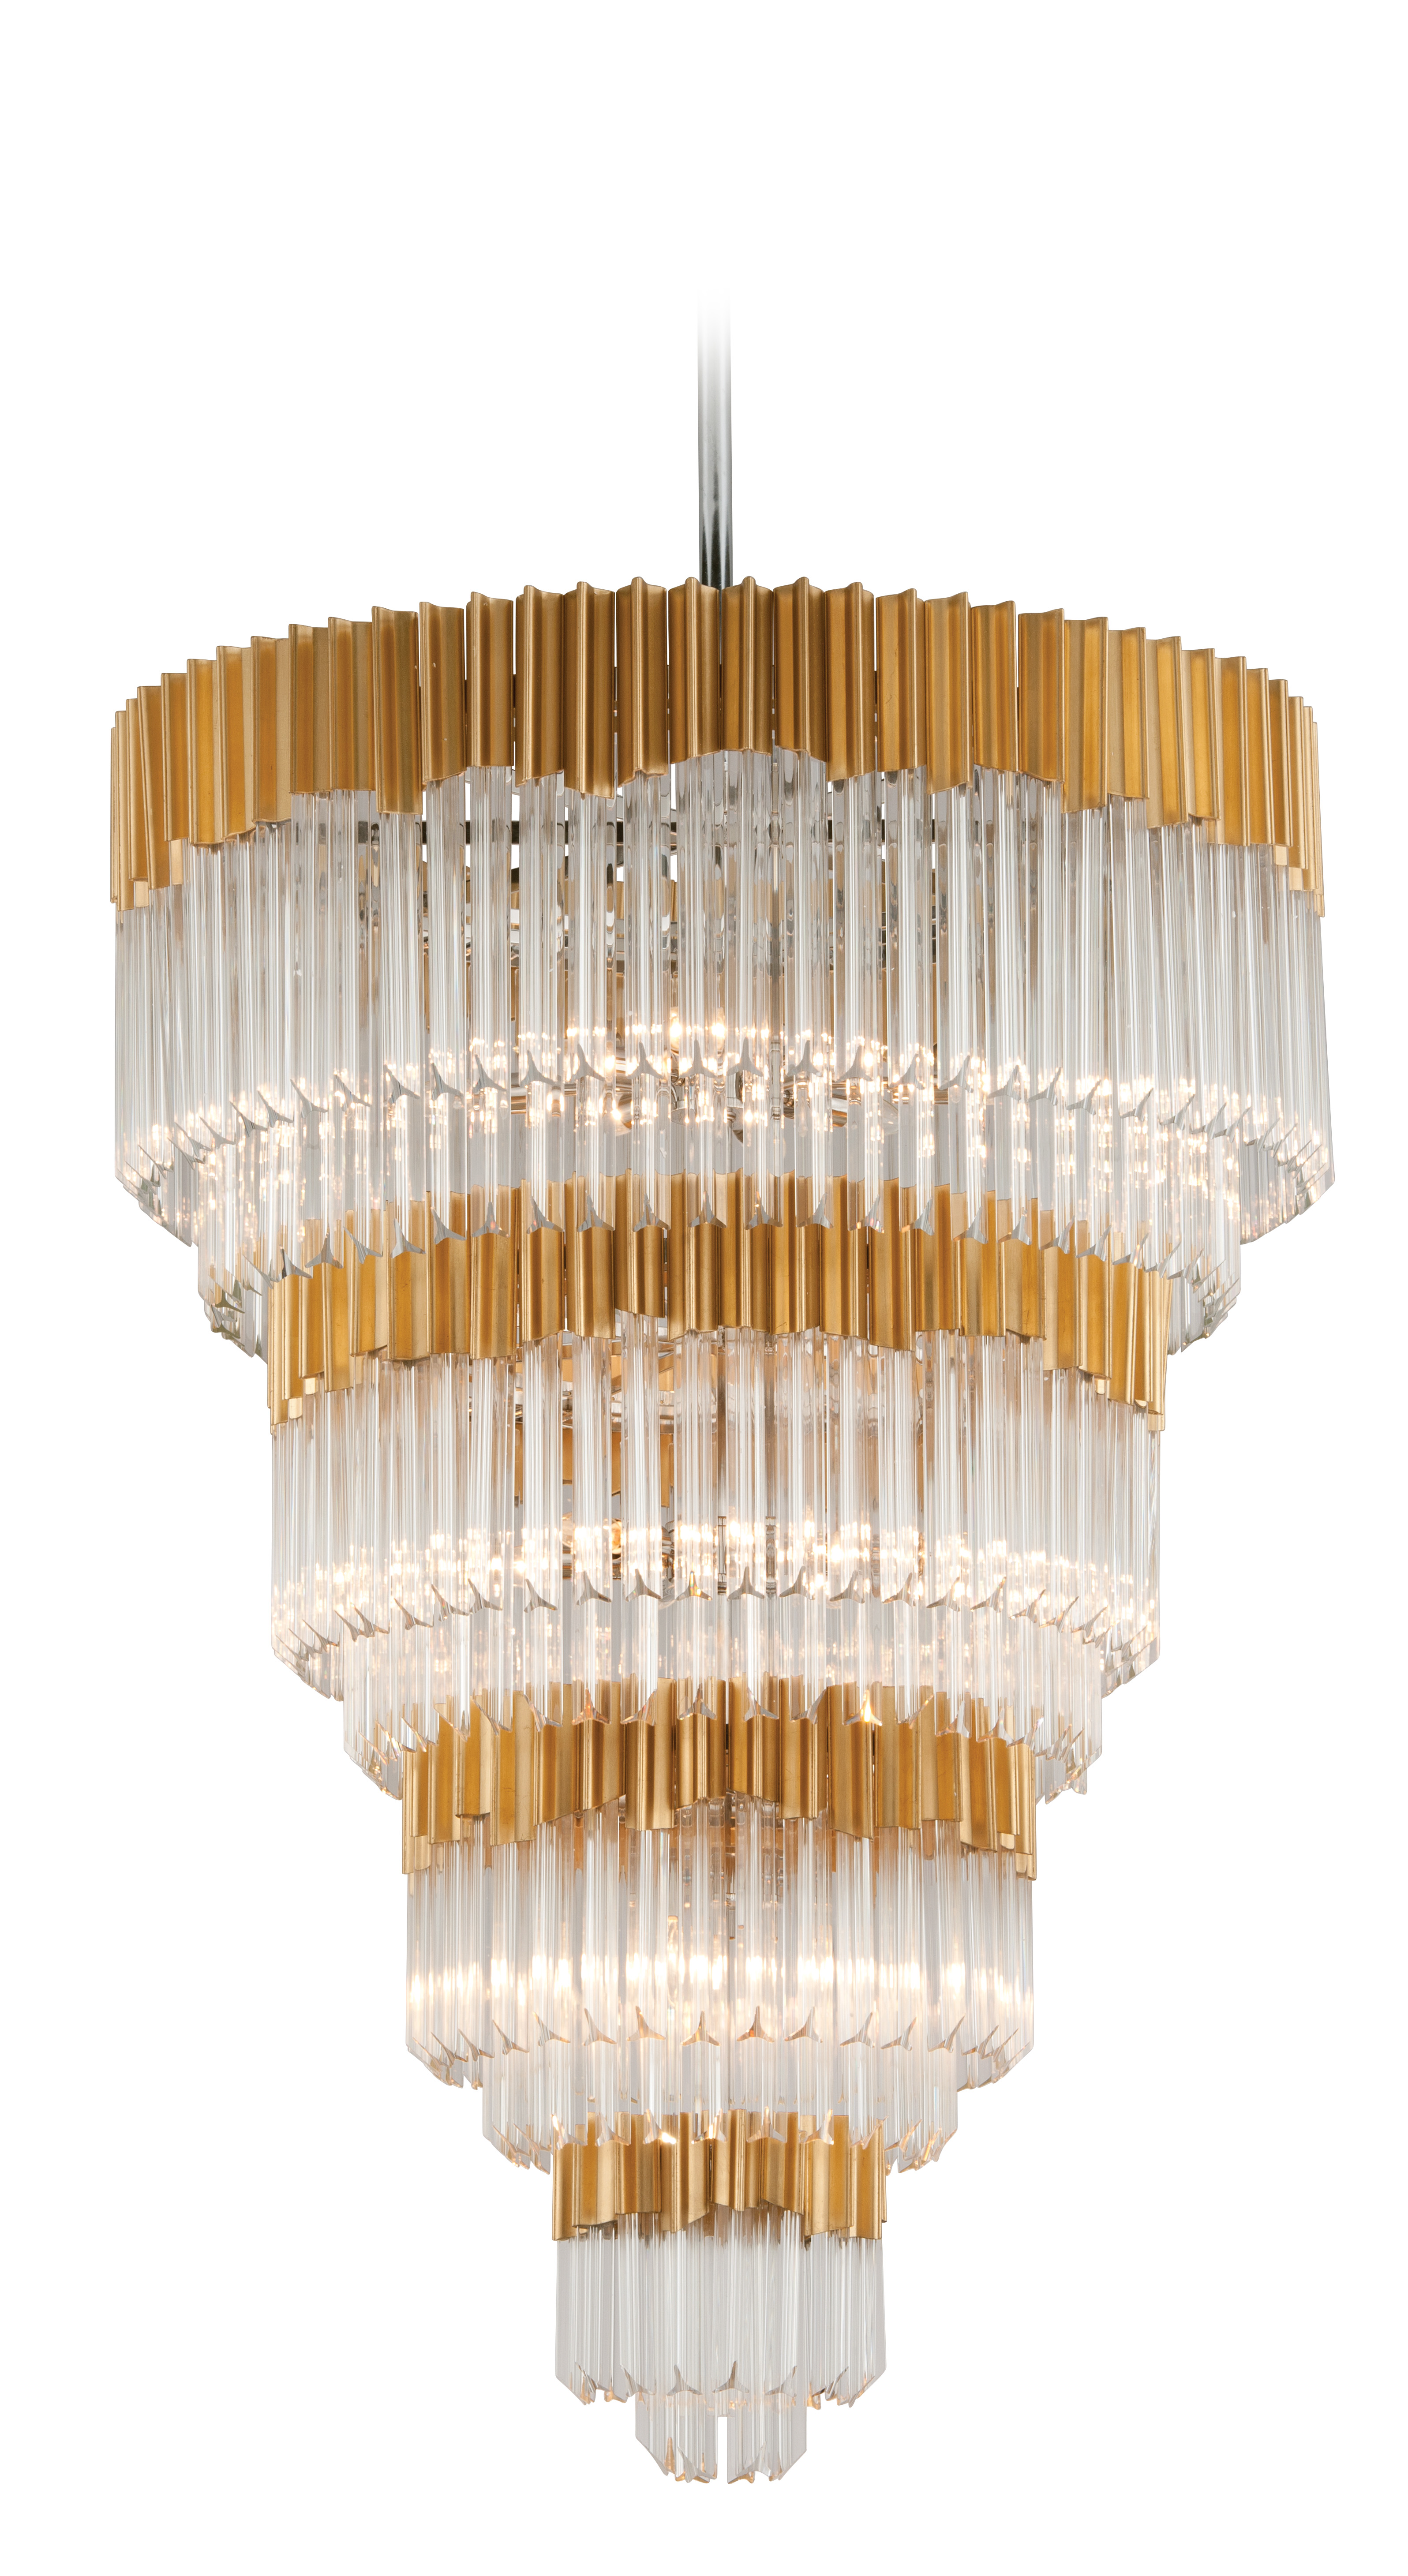 Charisma by Corbett Lighting - The delightful Charisma collection’s clear triedi crystal forms are arranged in a circular, tiered formation, resulting in a retro design with a new and fresh feel.